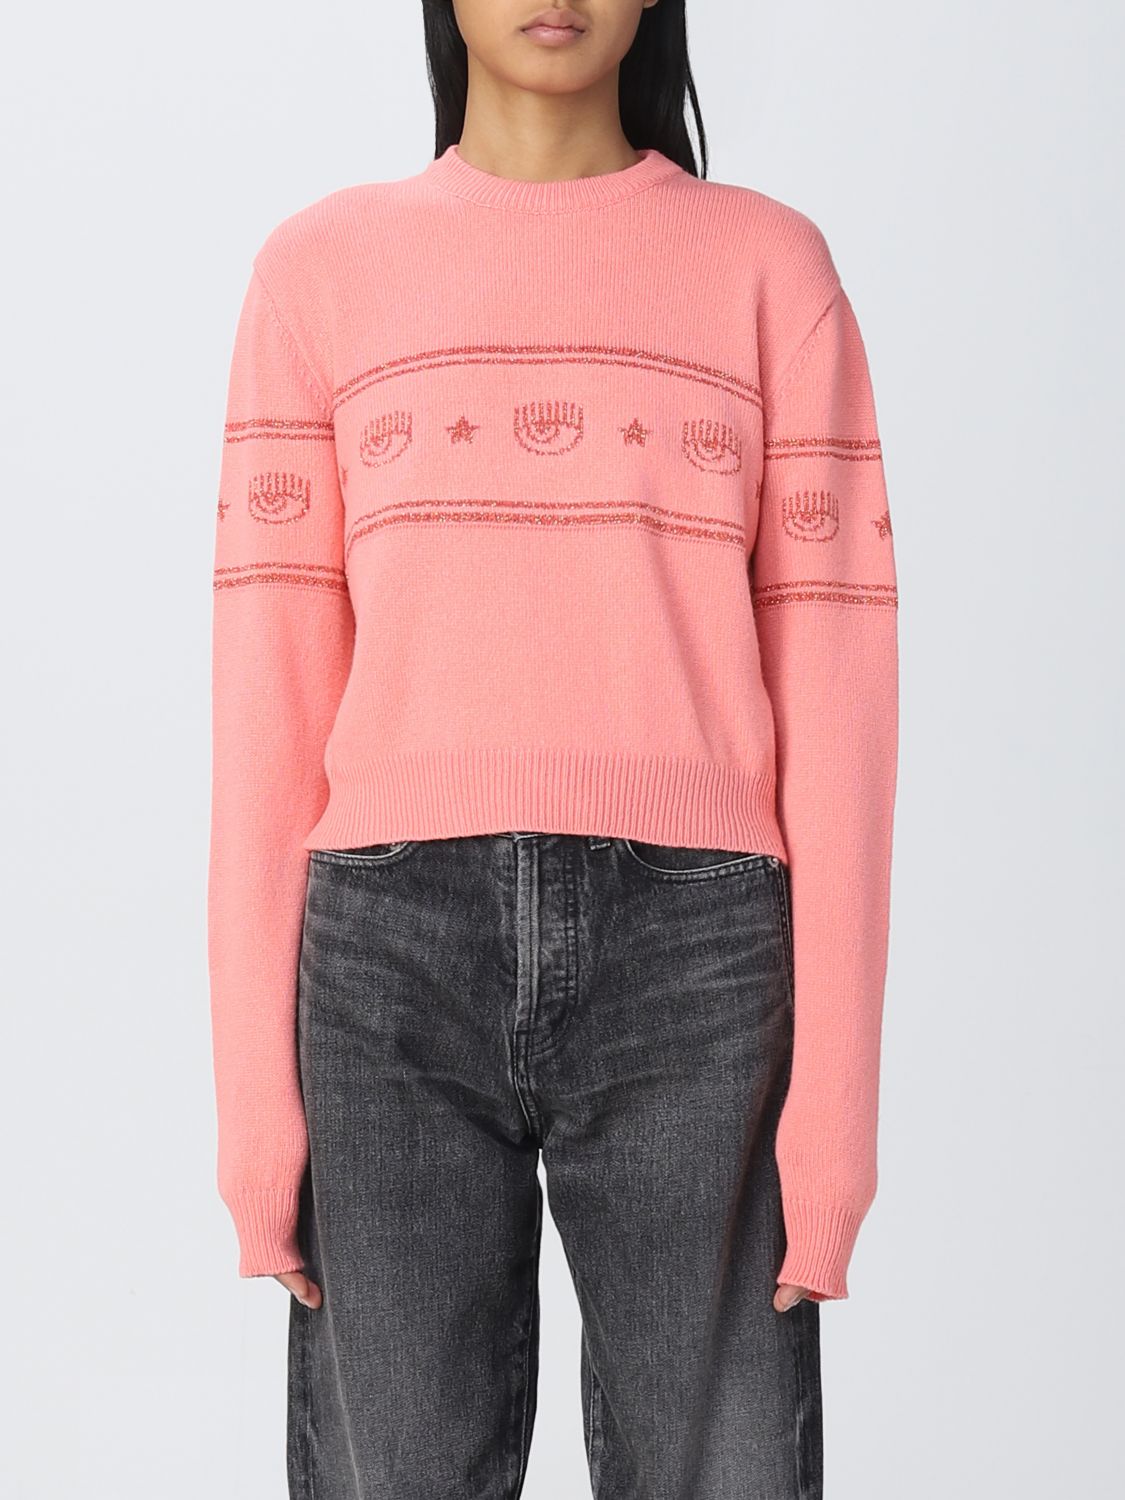 Sweater Chiara Ferragni: Chiara Ferragni sweater for woman pink 1